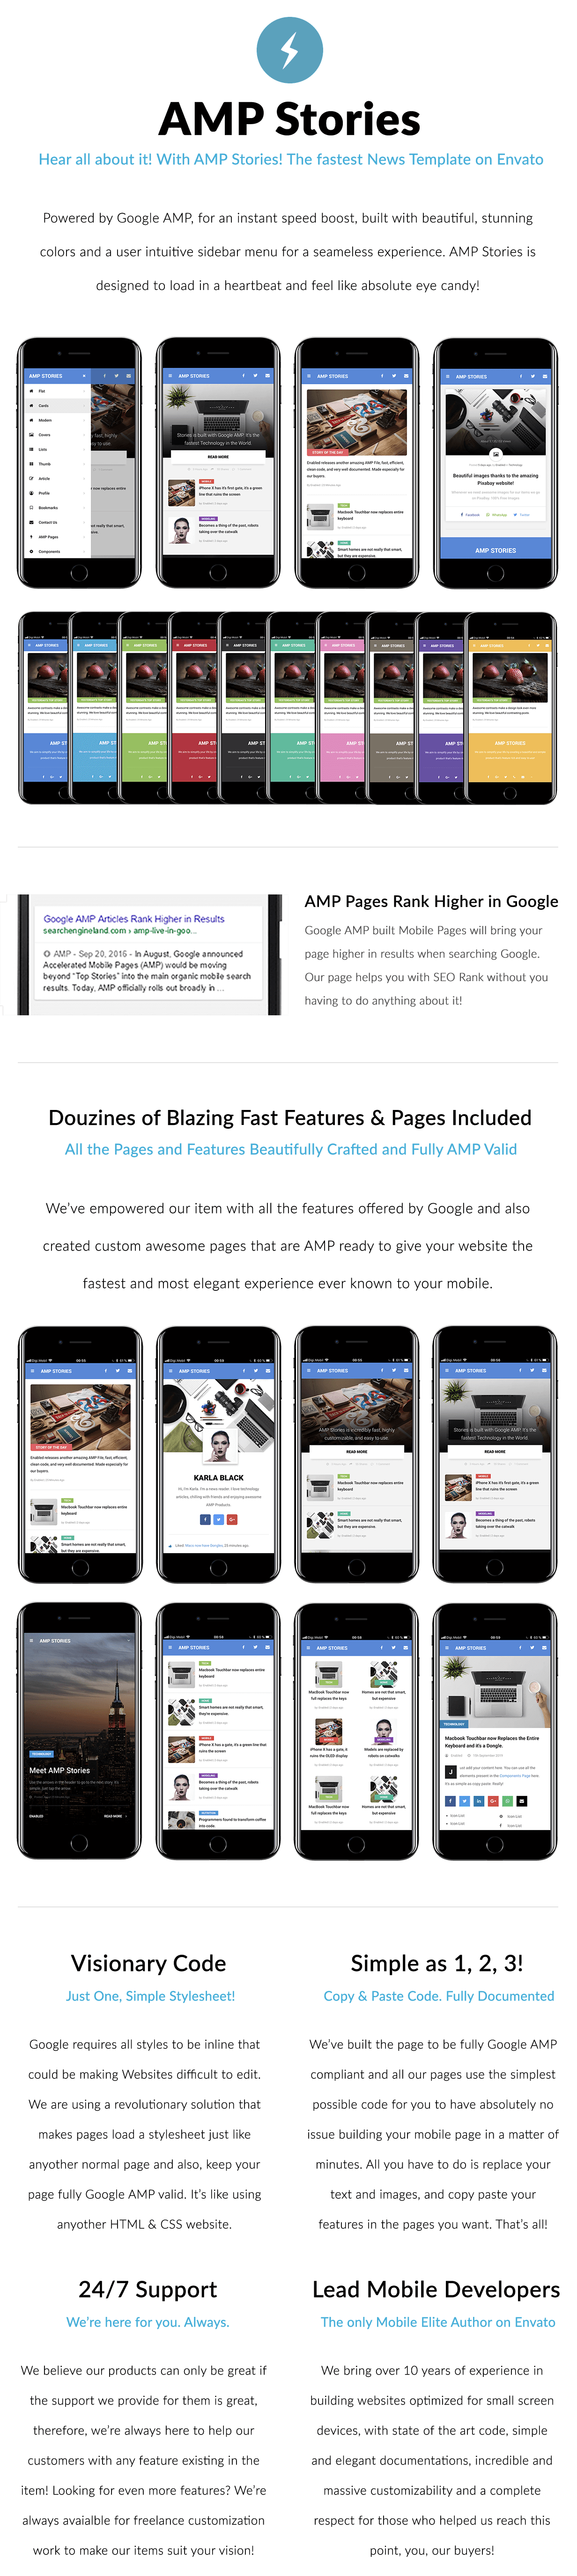 AMP Stories | Mobile Google AMP Template - 8